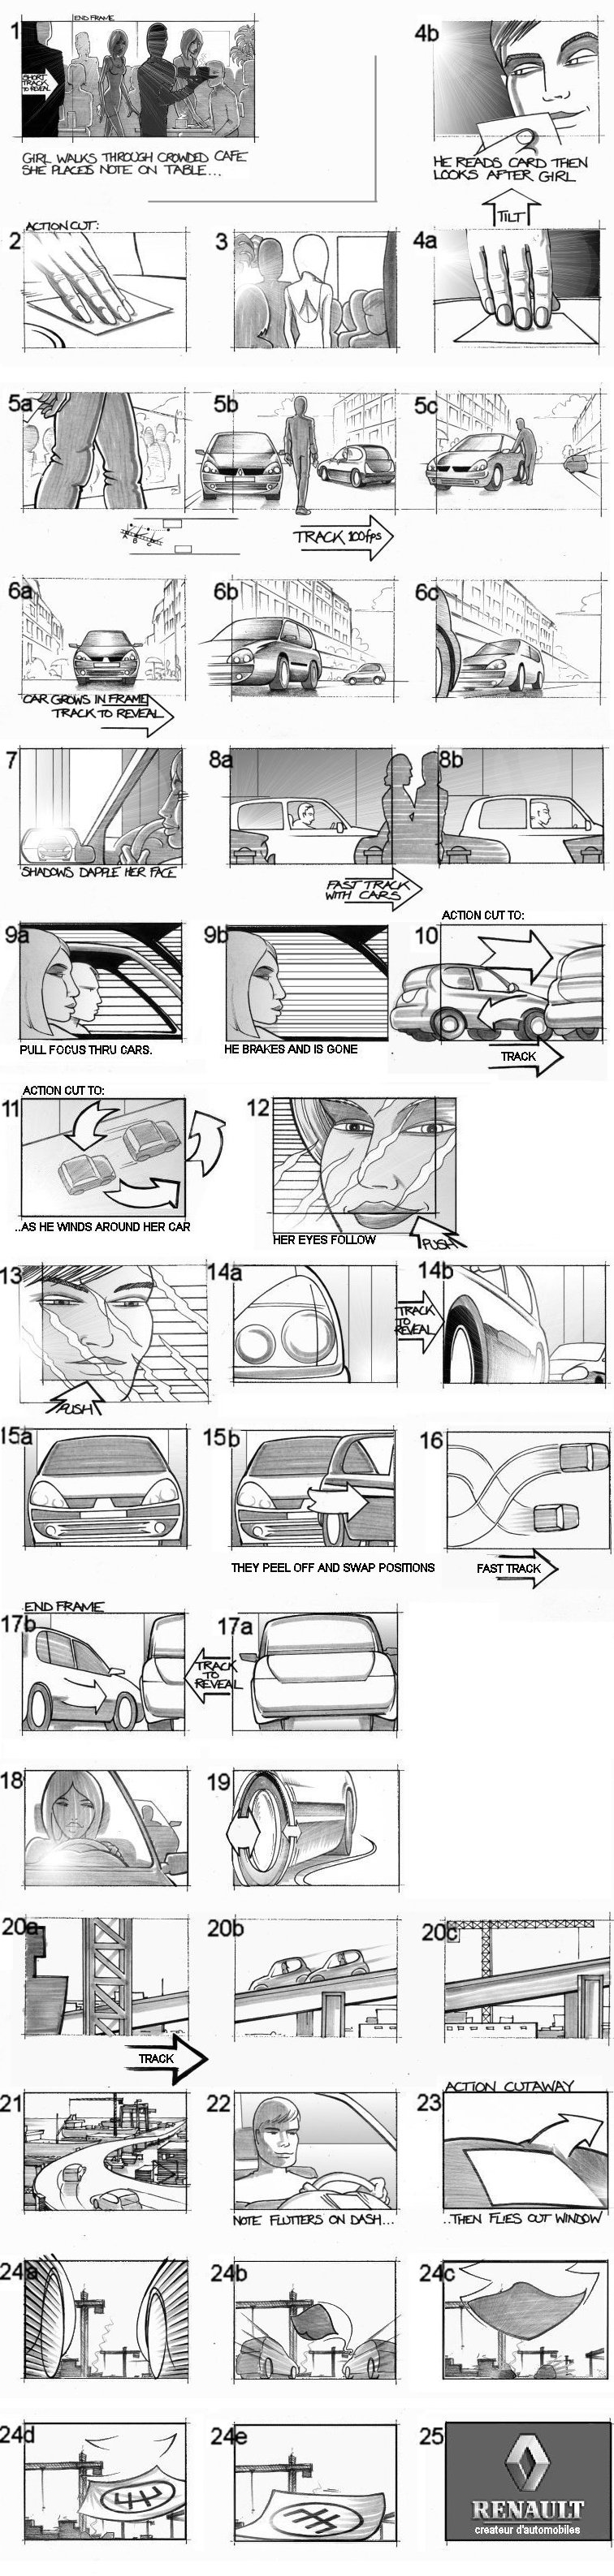 RENAULT CLIO STORYBOARDS BY ANDY SPARROW